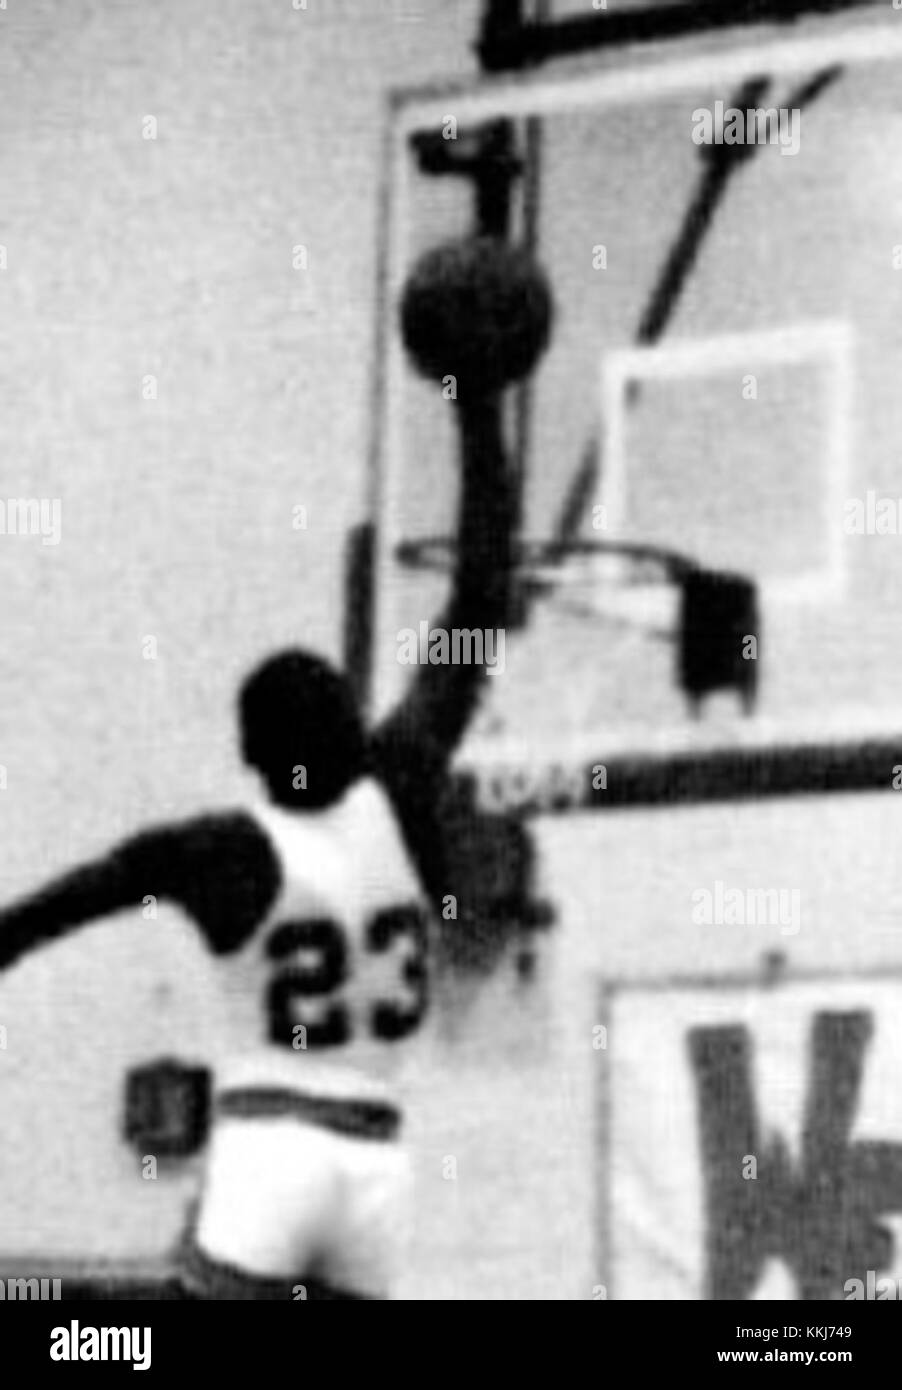 1979 Michael Jordan Laney High School Yearbook. Little could the